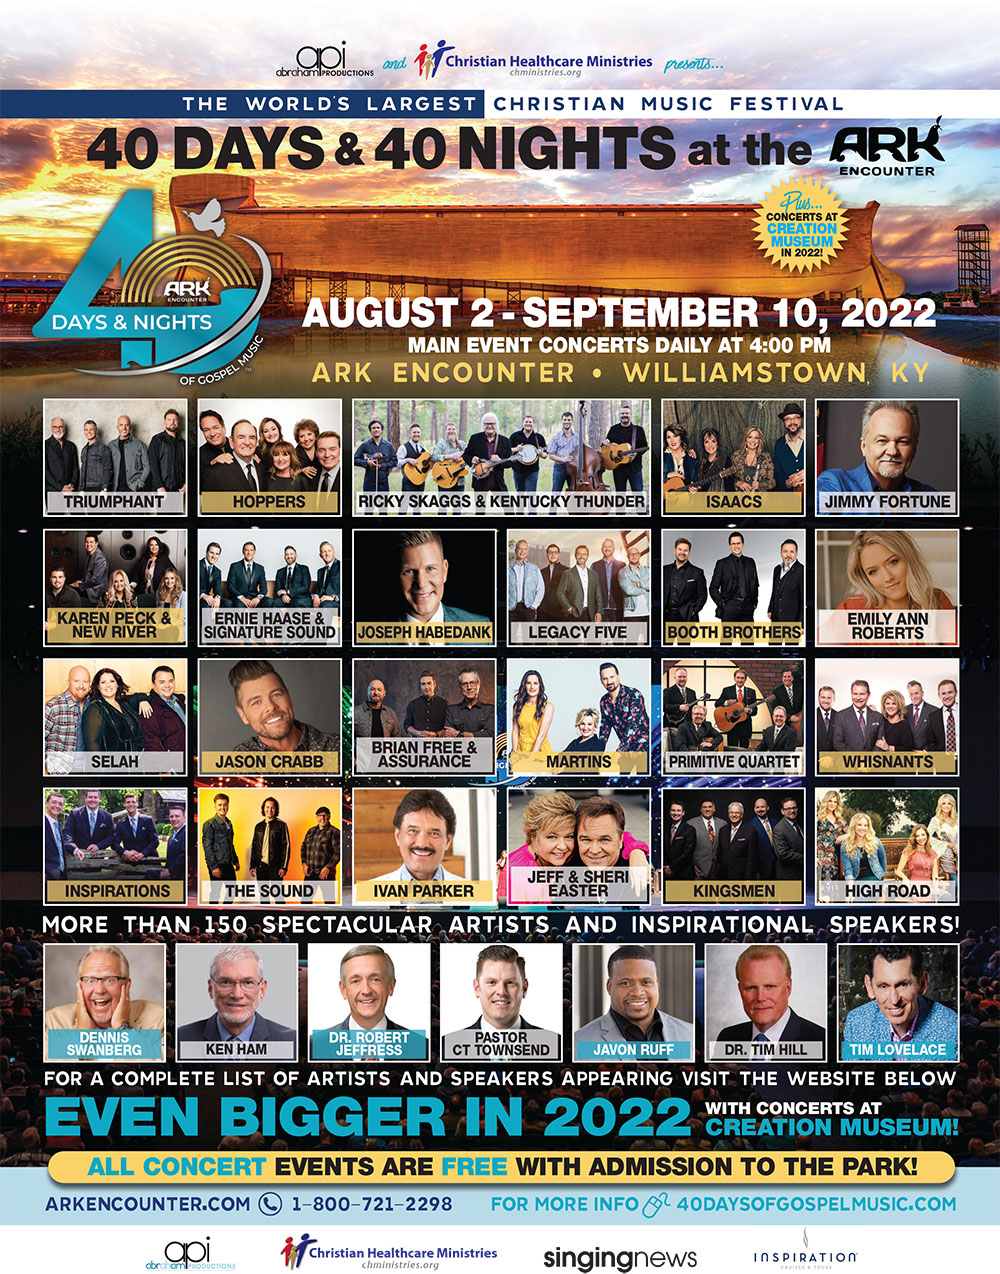 40 Days and 40 Nights of Gospel Music